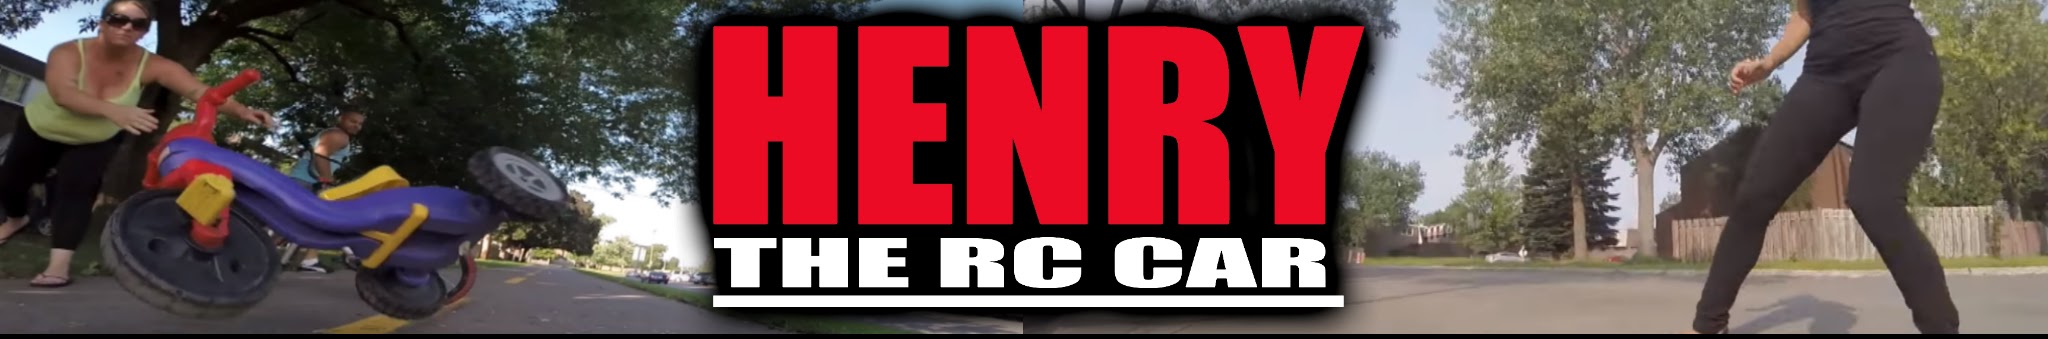 Henry The Rc Car Youtube Channel Analytics And Report Powered By